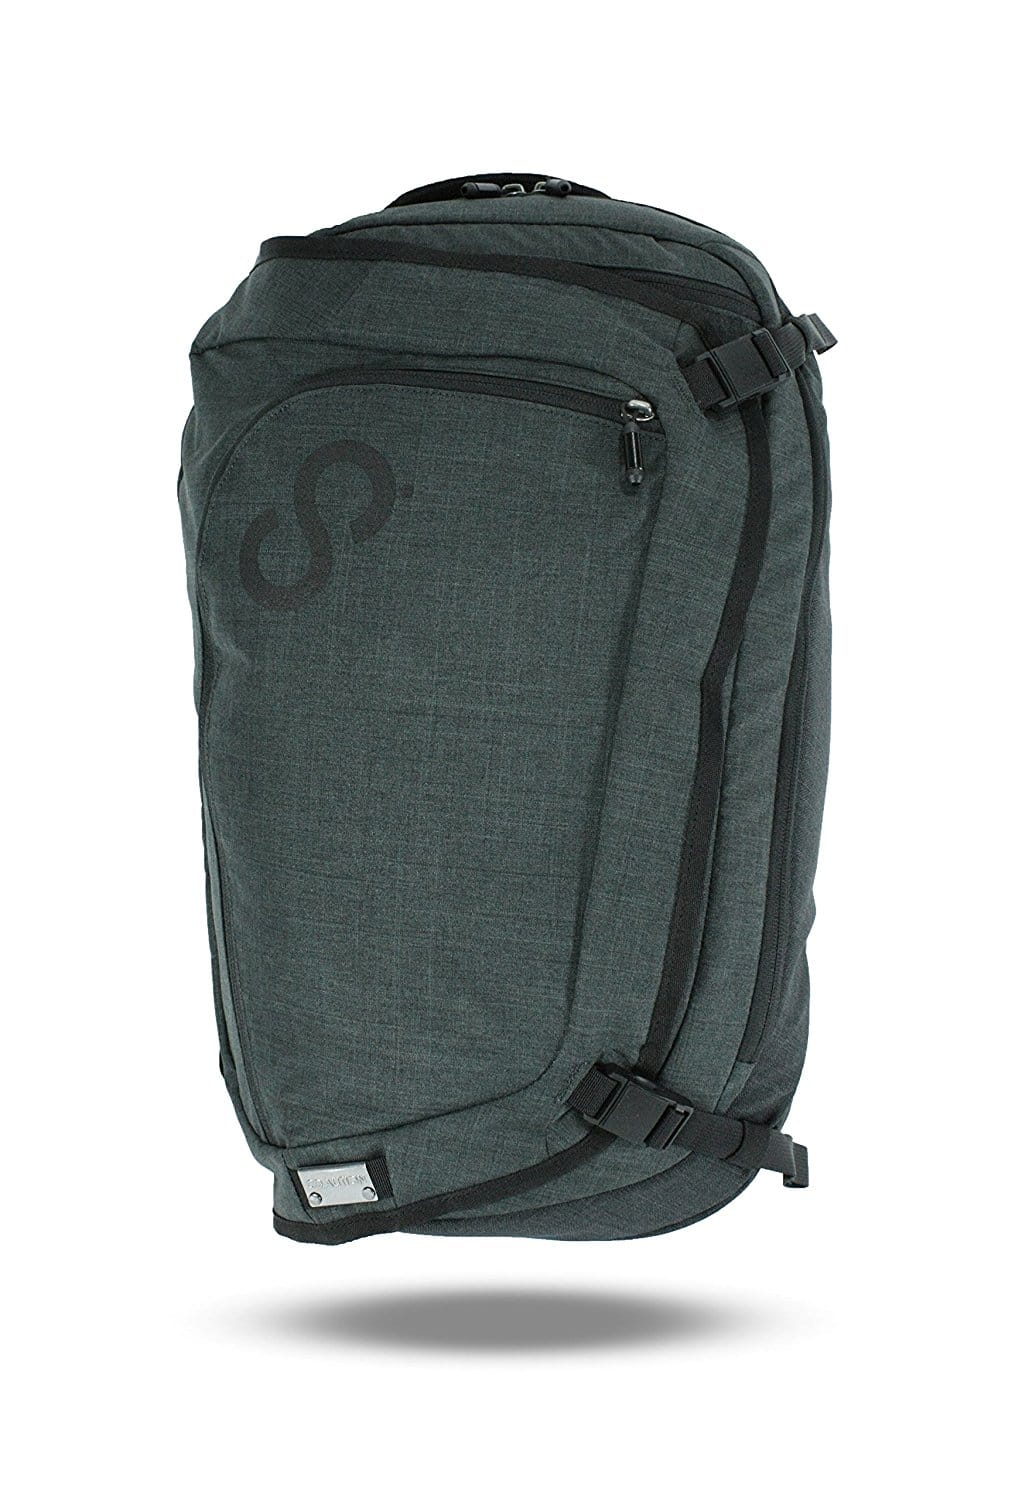 smart backpack - Co.alition Colfax